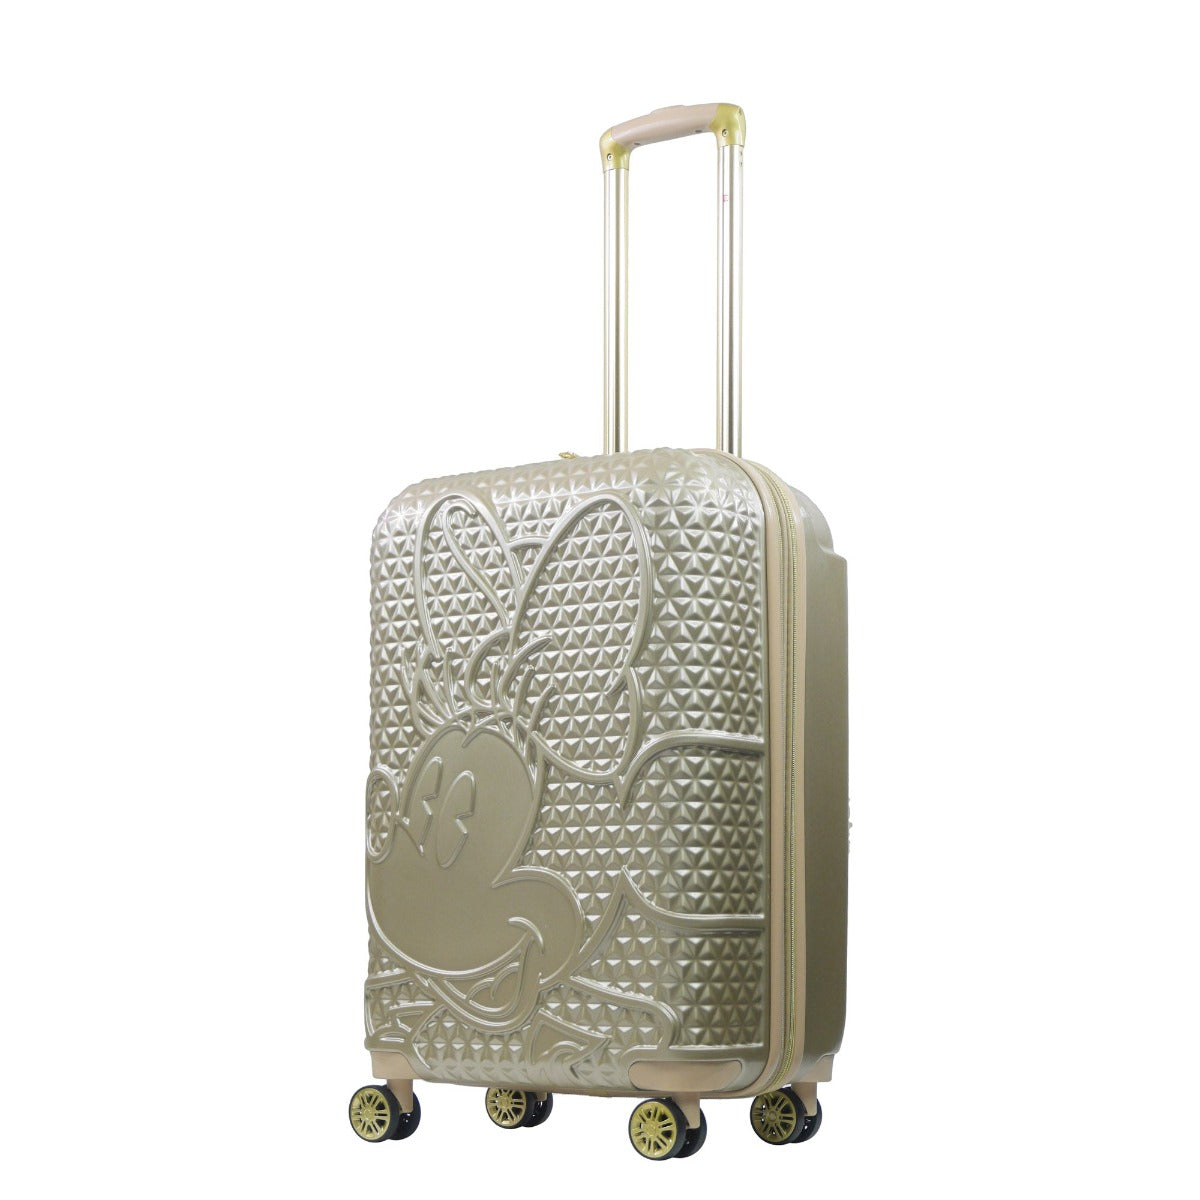 Taupe Ful Disney Minnie Mouse 25" checked luggage hardside spinner suitcase